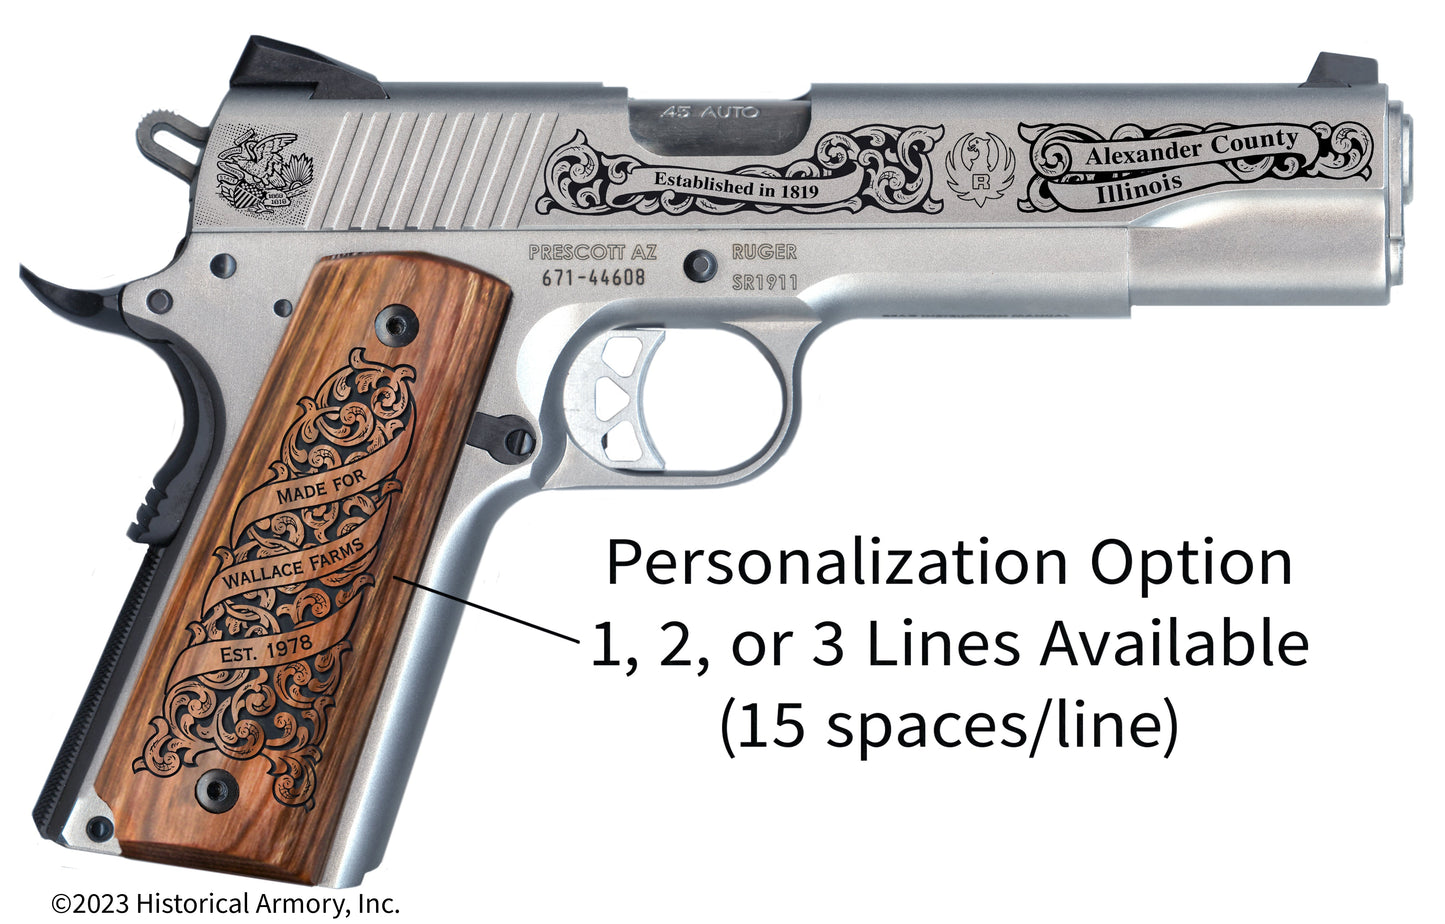 Alexander County Illinois Personalized Engraved .45 Auto Ruger 1911